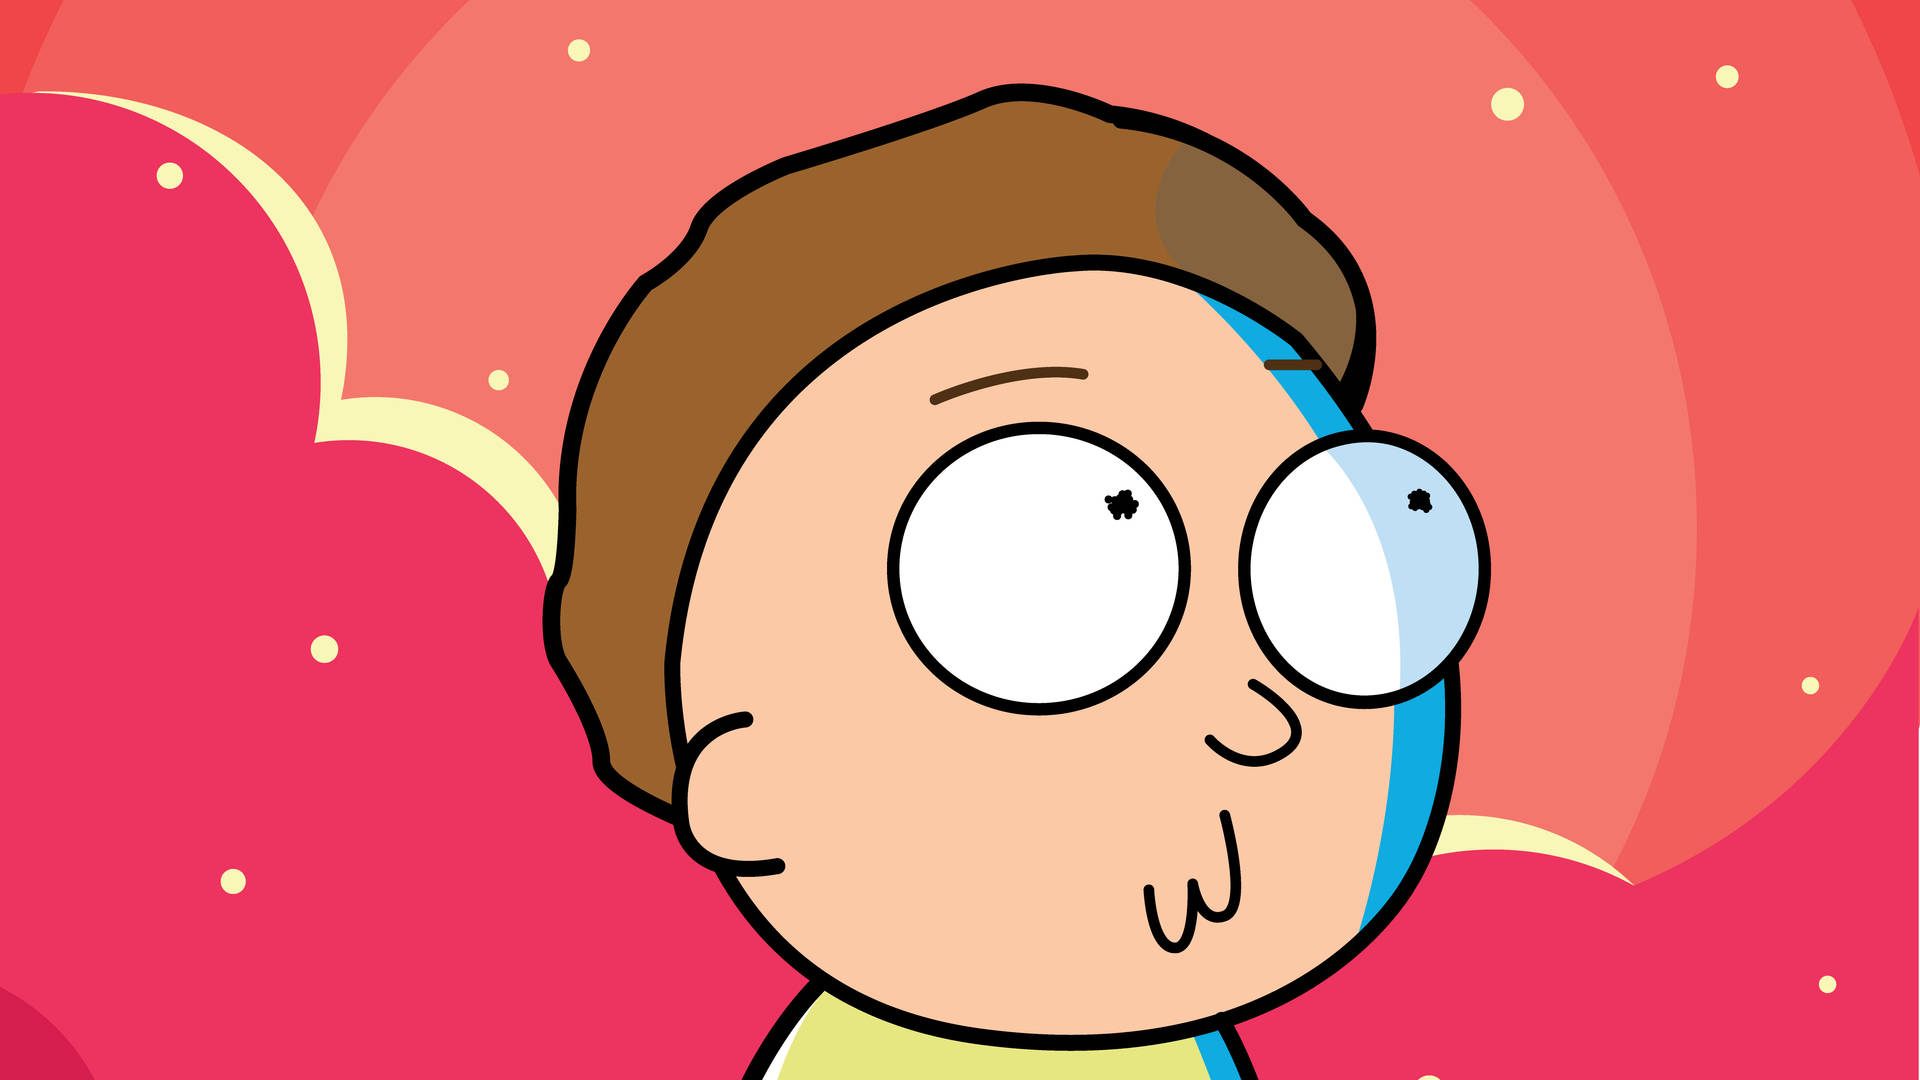 Rick And Morty Pc 4k Dumbfounded Expression